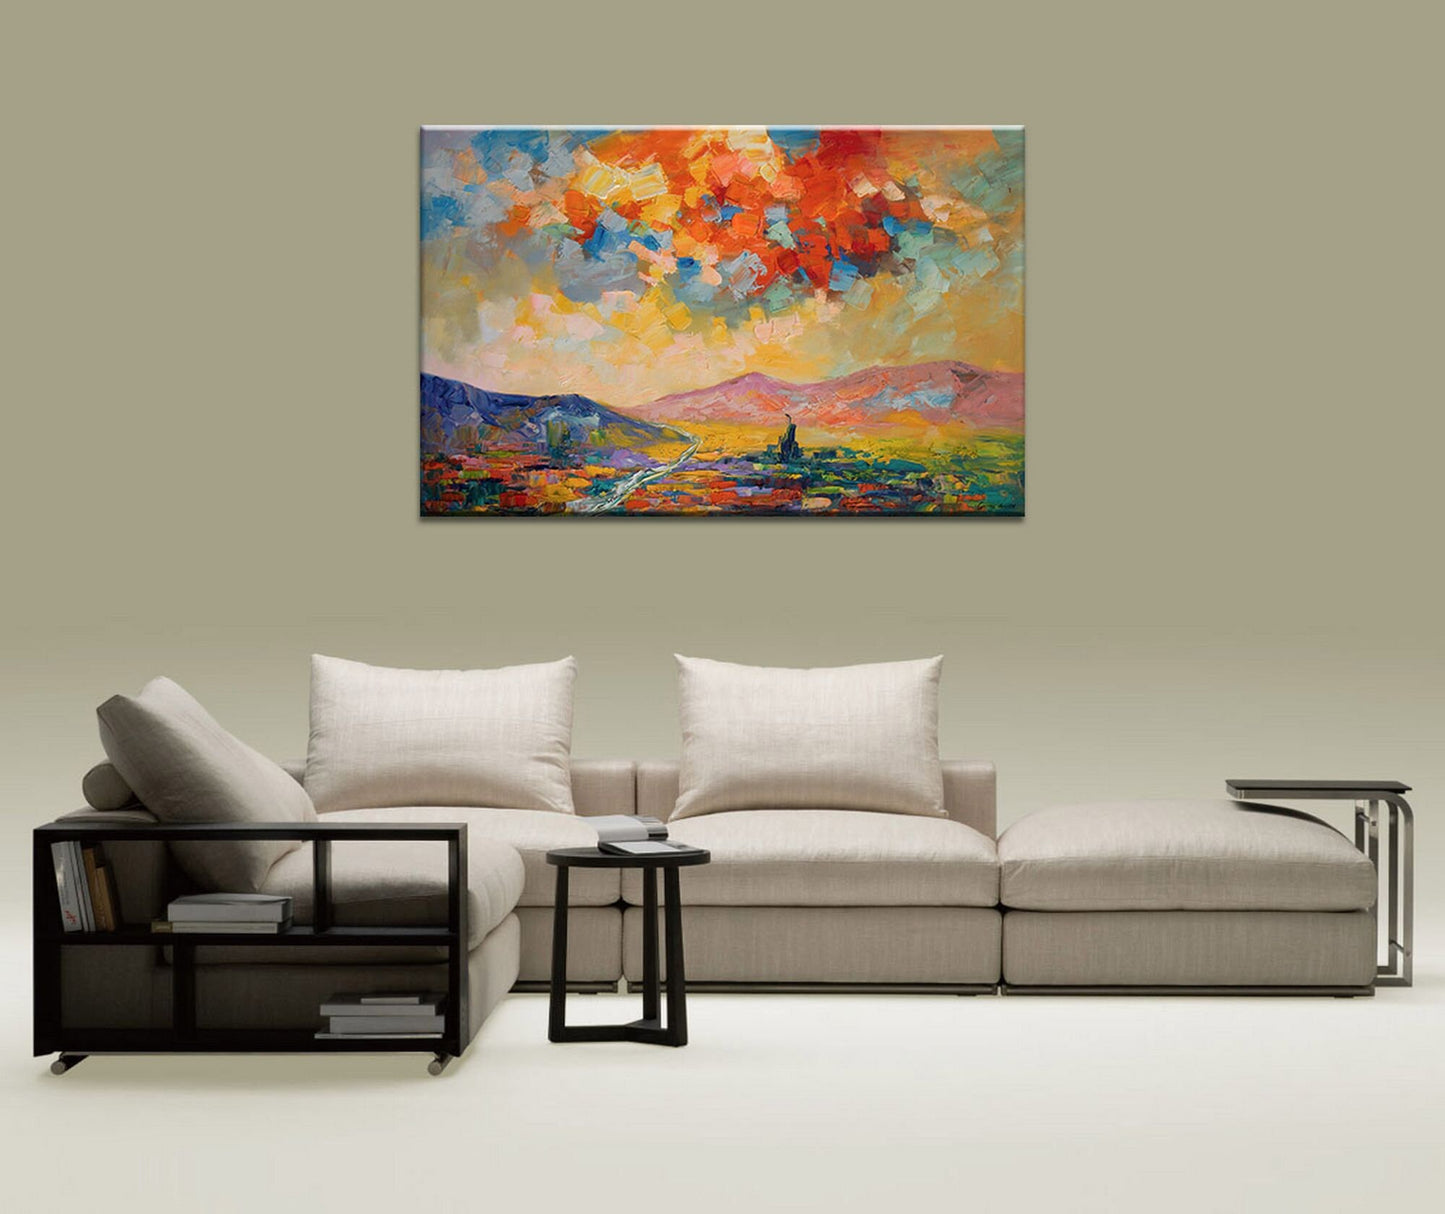 Abstract Landscape Oil Painting Mountain Sunset, Artwork, Oil Painting, Landscape, Large Painting, Handmade Painting, Contemporary Art